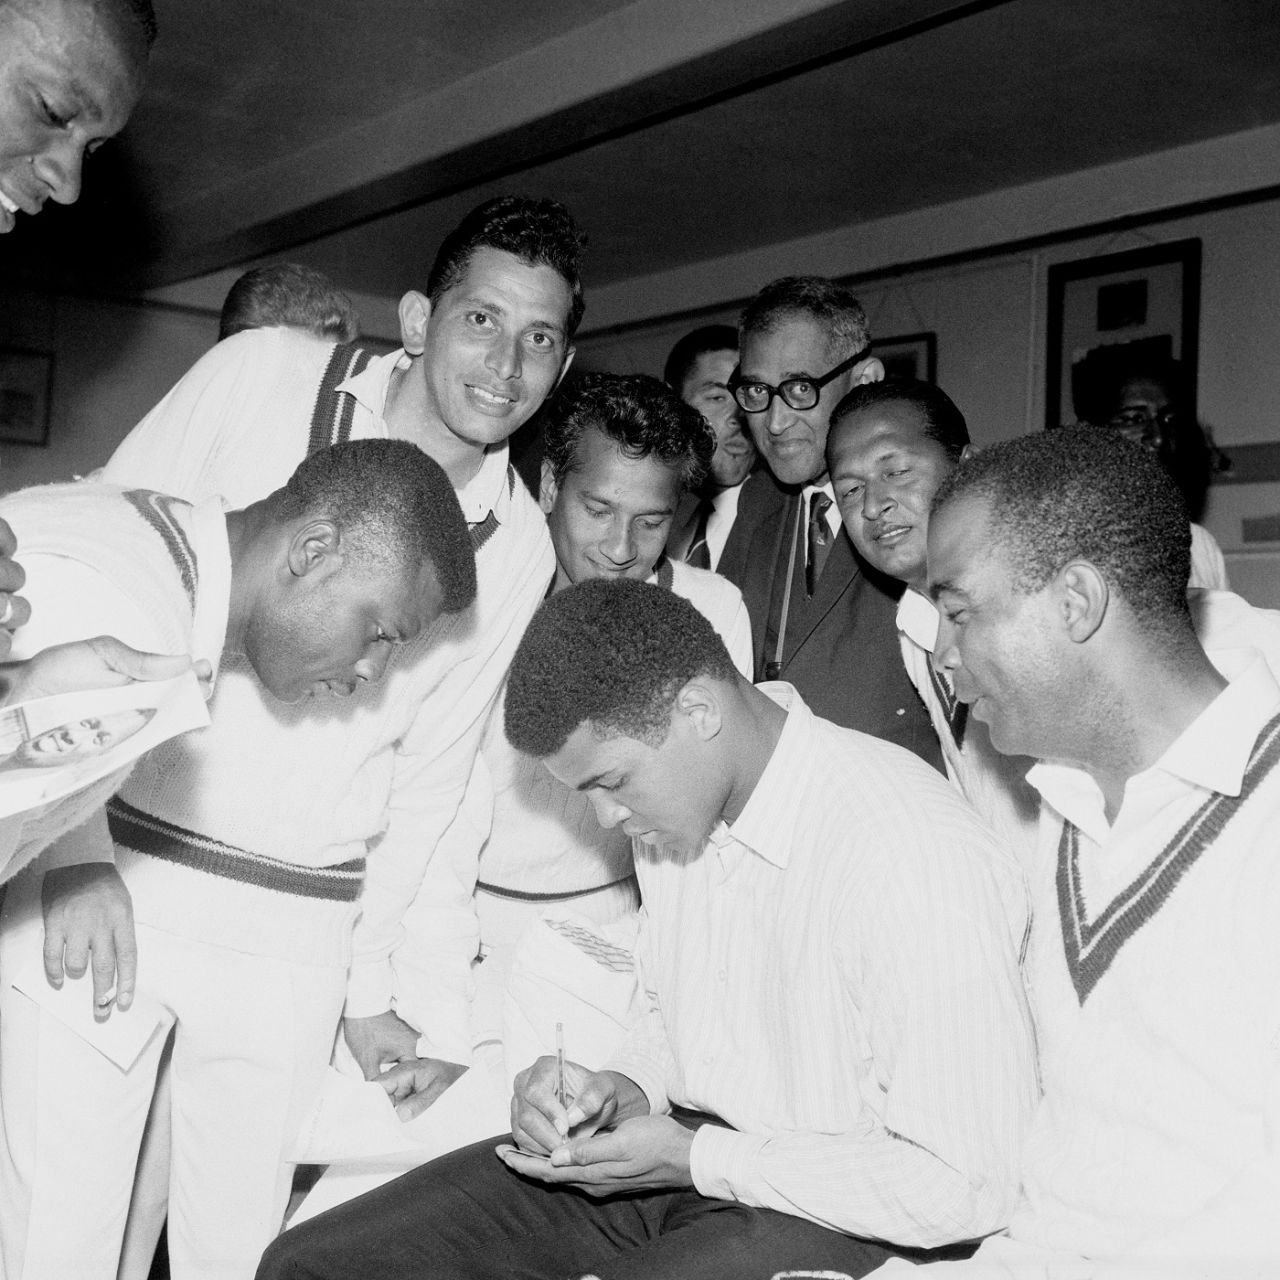 Muhammad Ali signs autographs for the West Indies players in the dressing room, England vs West Indies, Lord's, 1st day, June 16, 1966